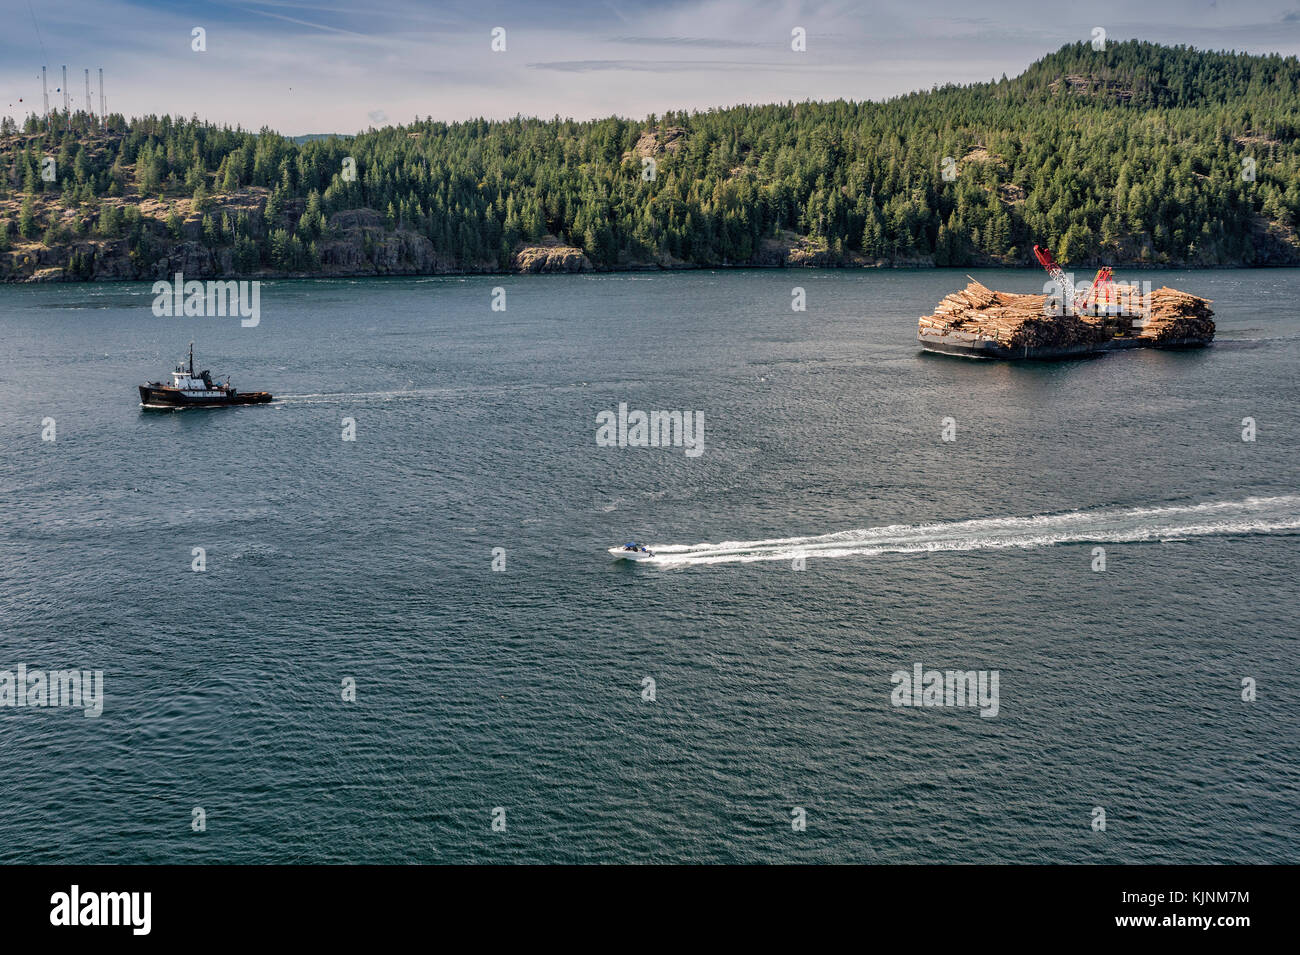 Tugboat towing ITB Beaufort Sea, barge loaded with timber, Seymour Narrows at Discovery Passage, Vancouver Island in dist, British Columbia, Canada Stock Photo